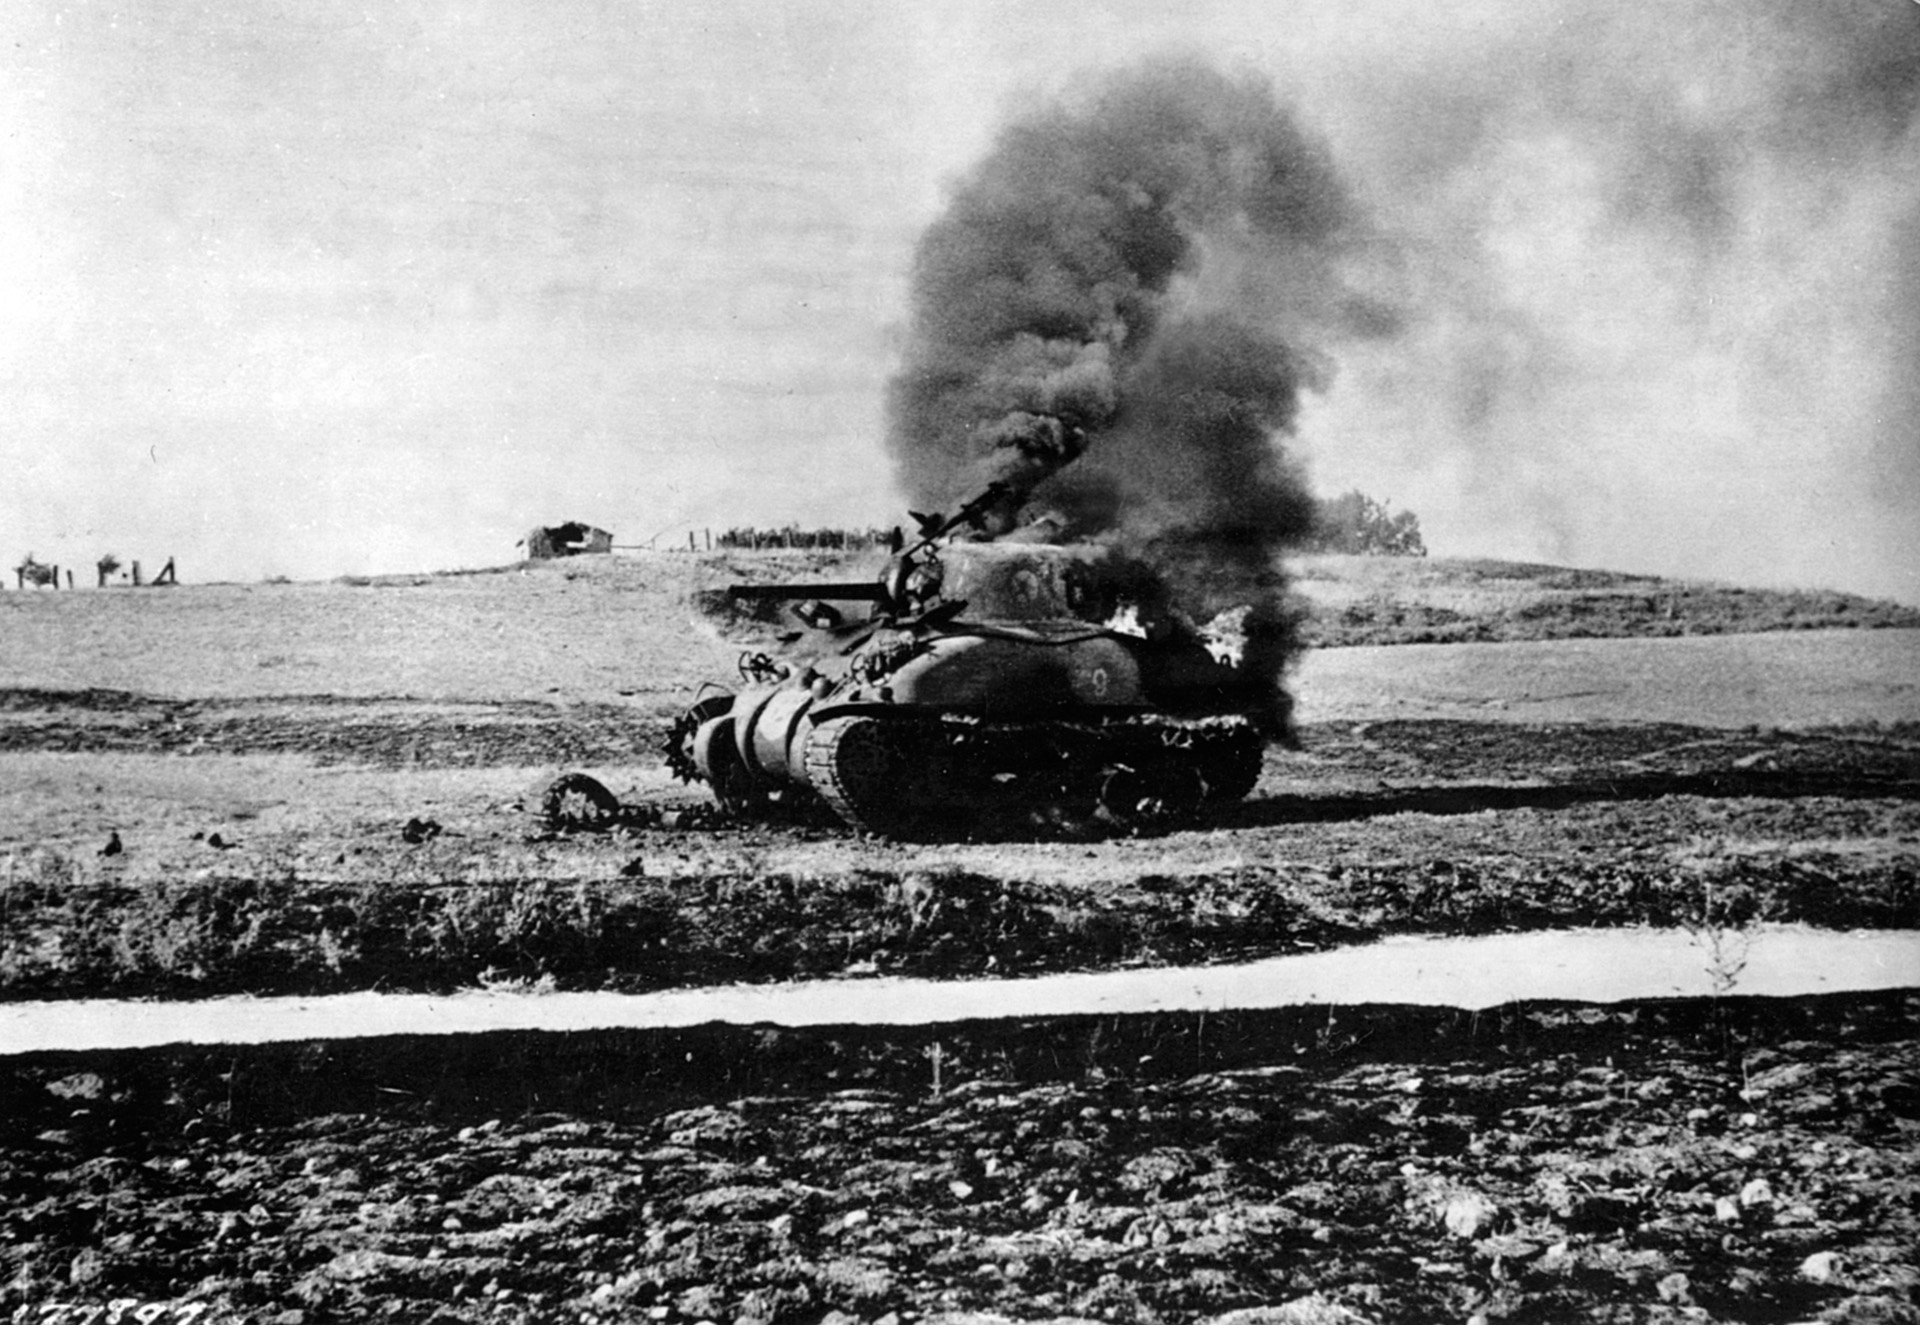 An M4 Sherman tank burns fiercely after being knocked out by enemy artillery fire in a field near Canicatti, Sicily. 